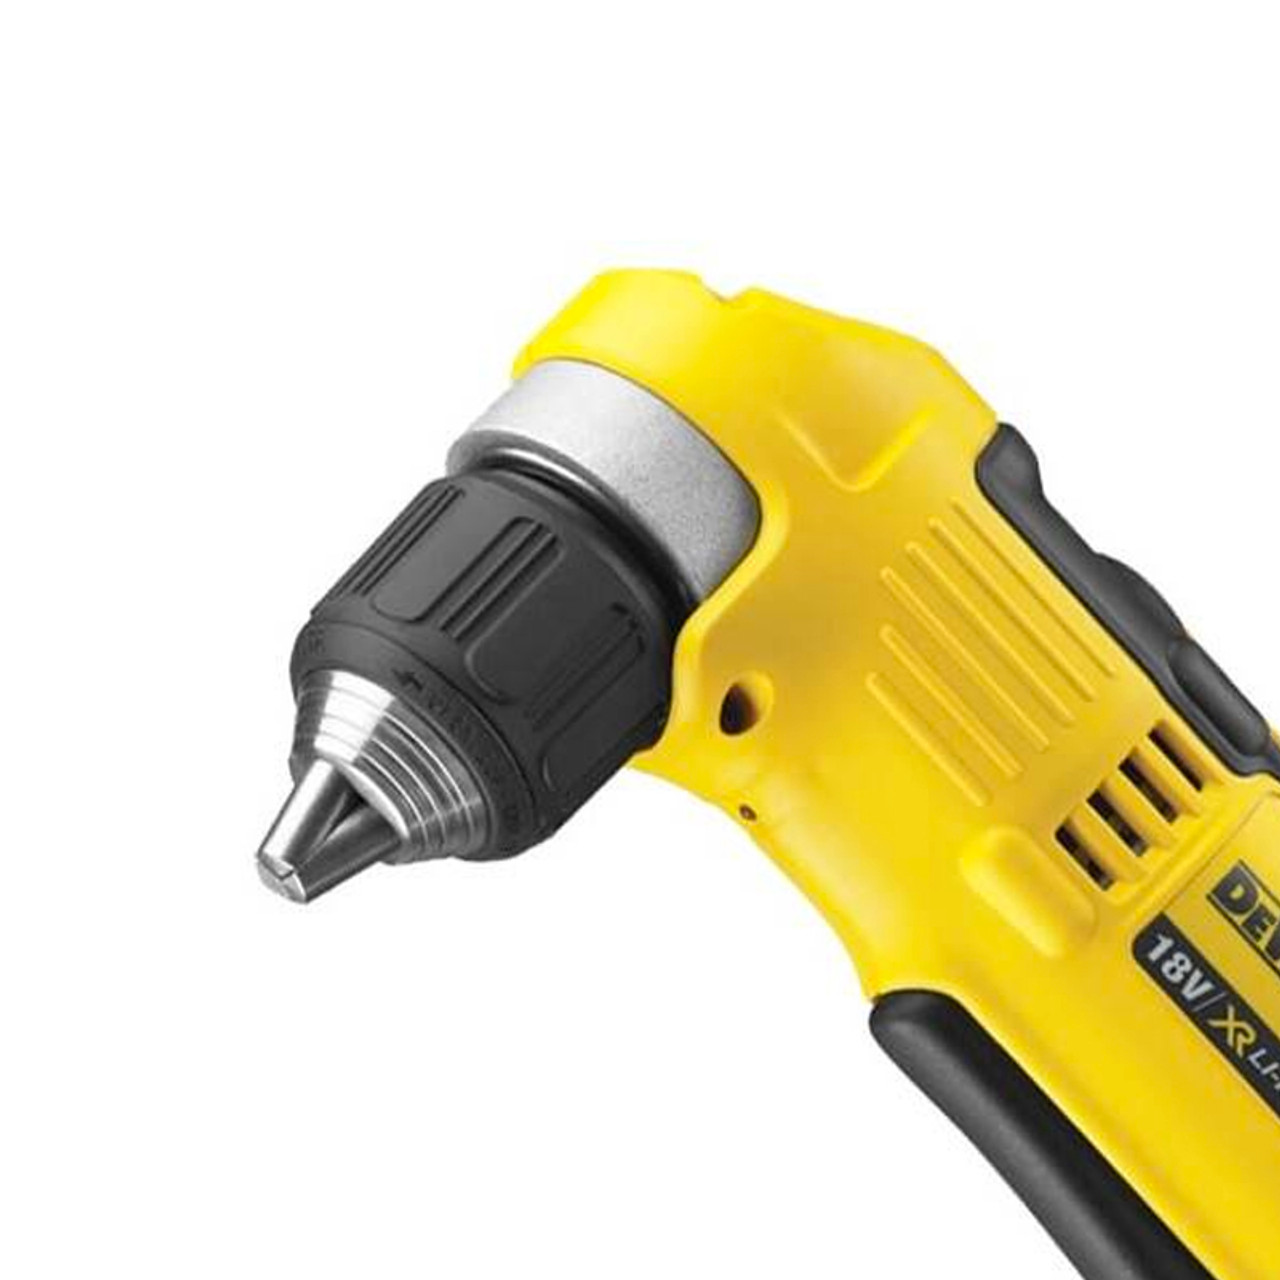 DeWalt cordless drill for confined tight spaces DCD740N-XJ